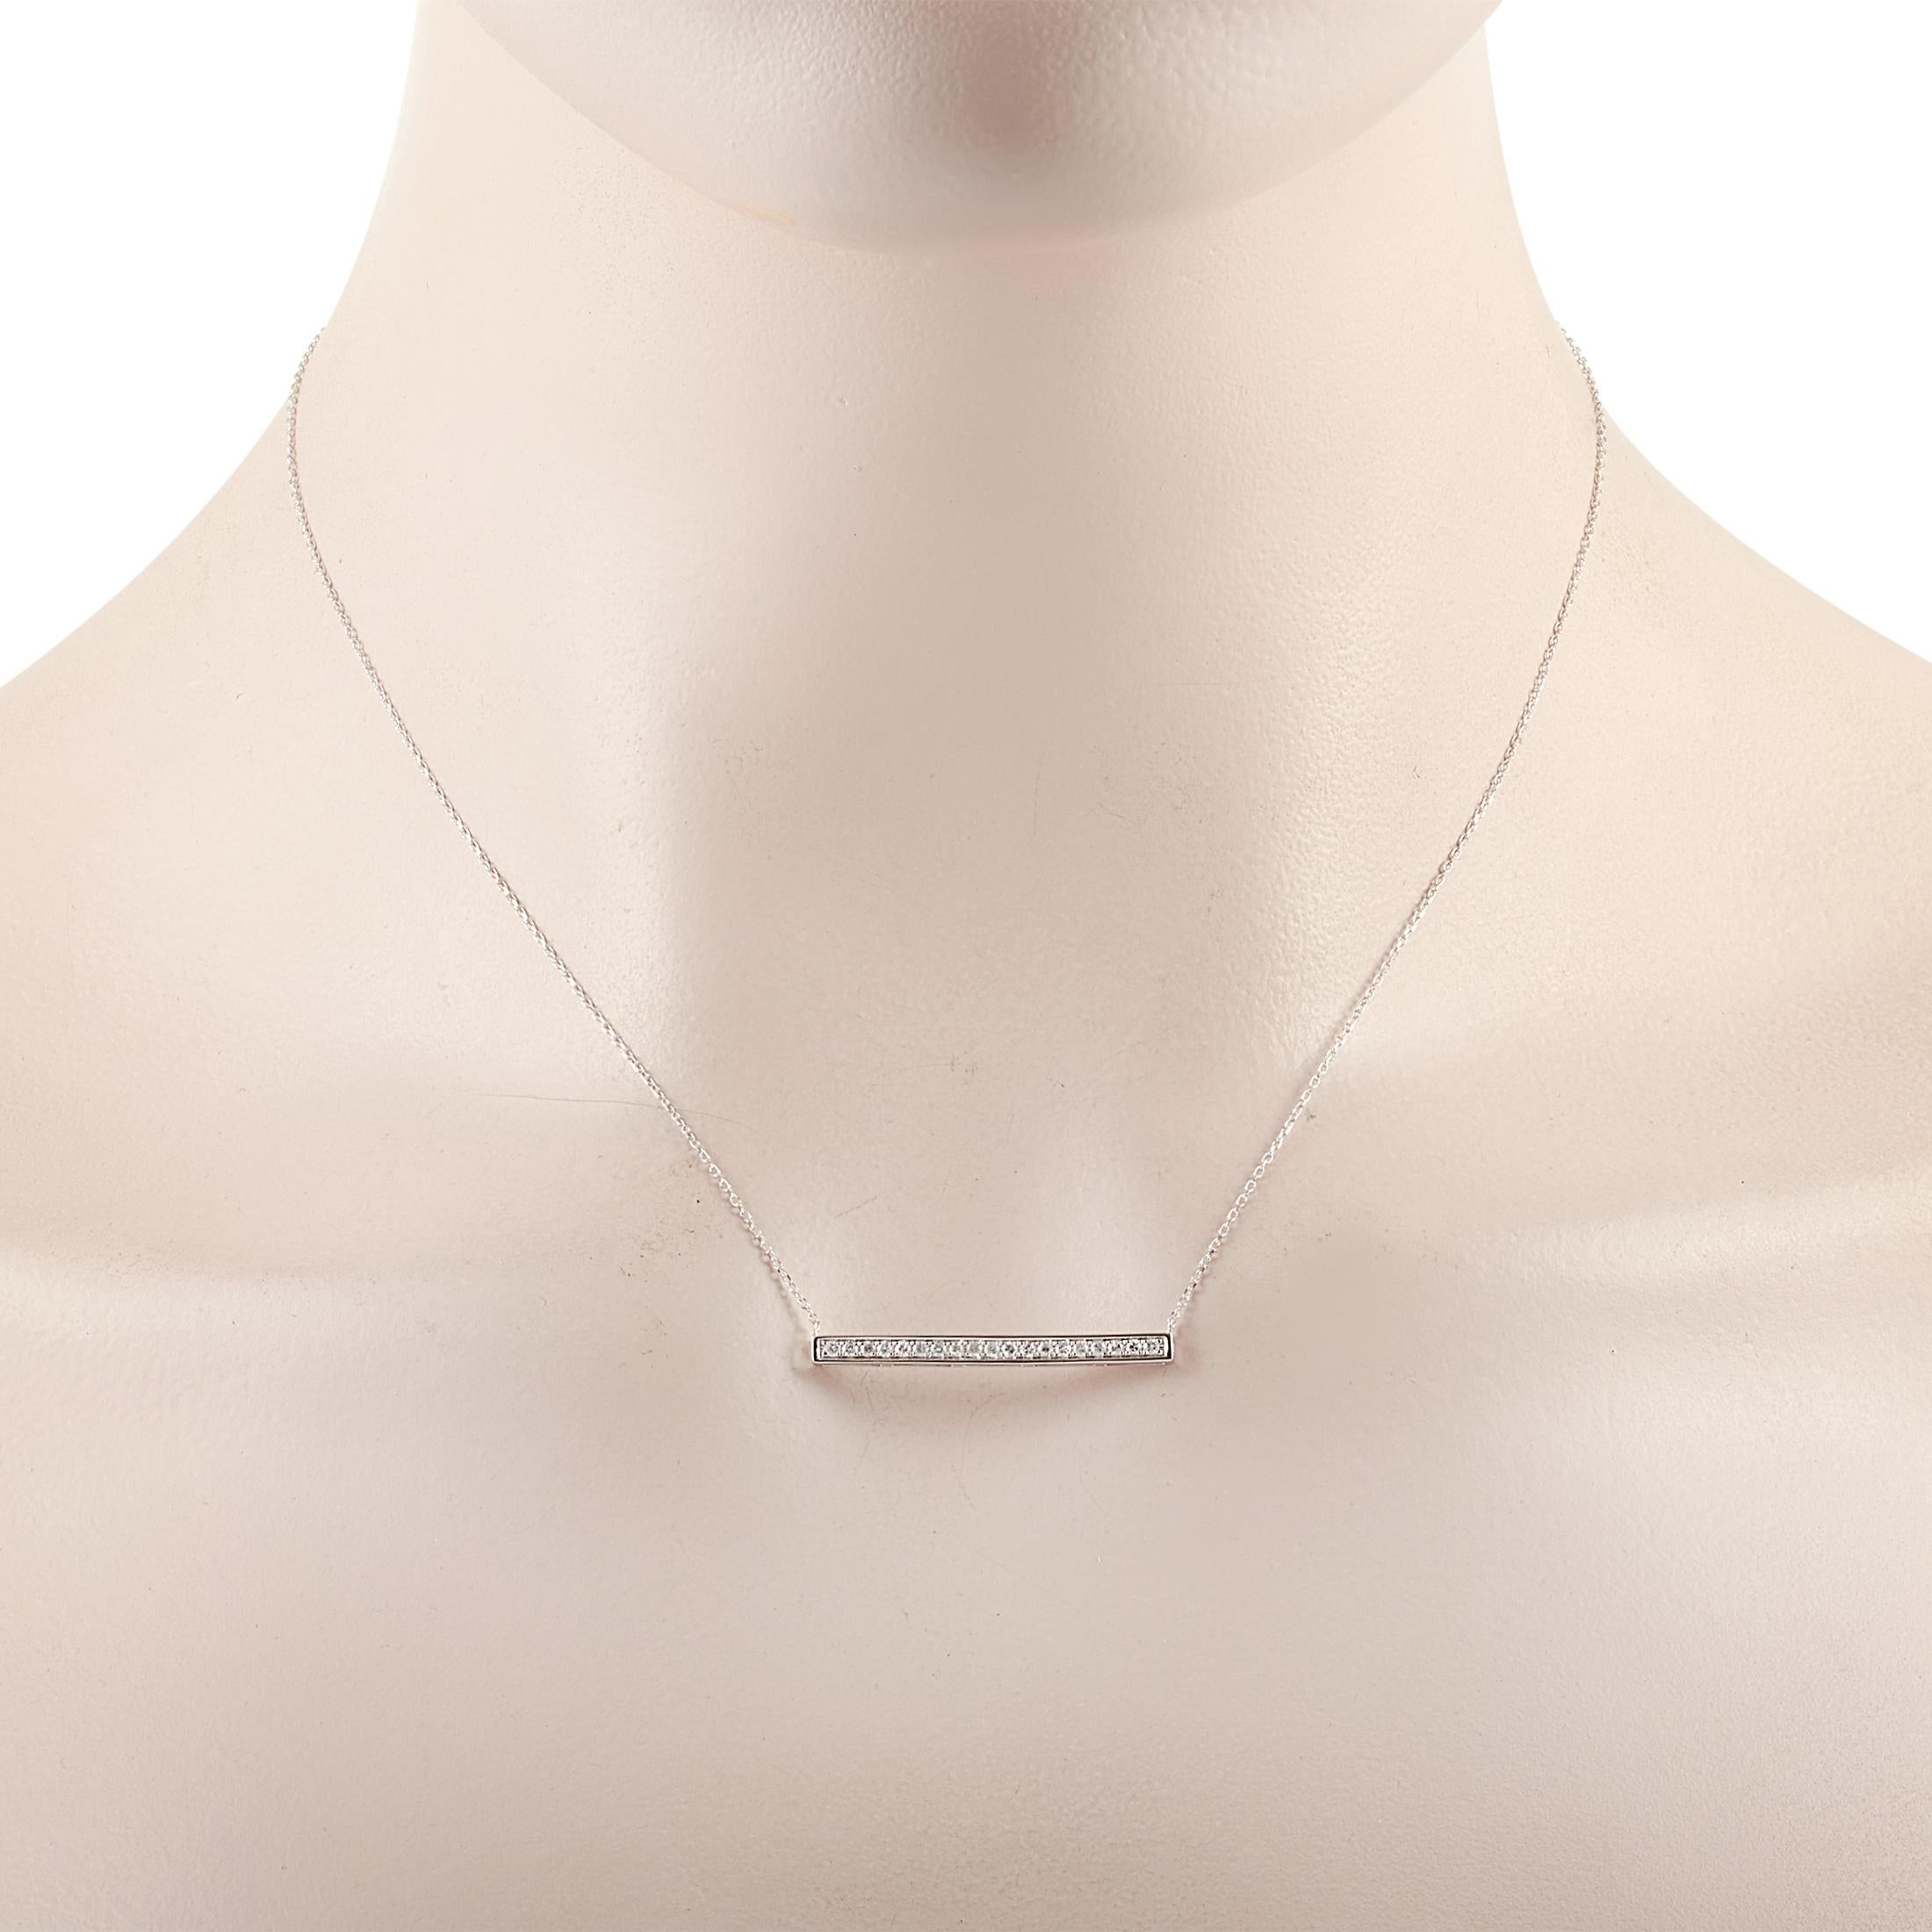 This LB Exclusive necklace is made of 14K white gold and embellished with diamonds that amount to 0.25 carats. The necklace weighs 2.1 grams and boasts a 15” chain and a pendant that measures 0.13” in length and 1.25” in width.
 
 Offered in brand